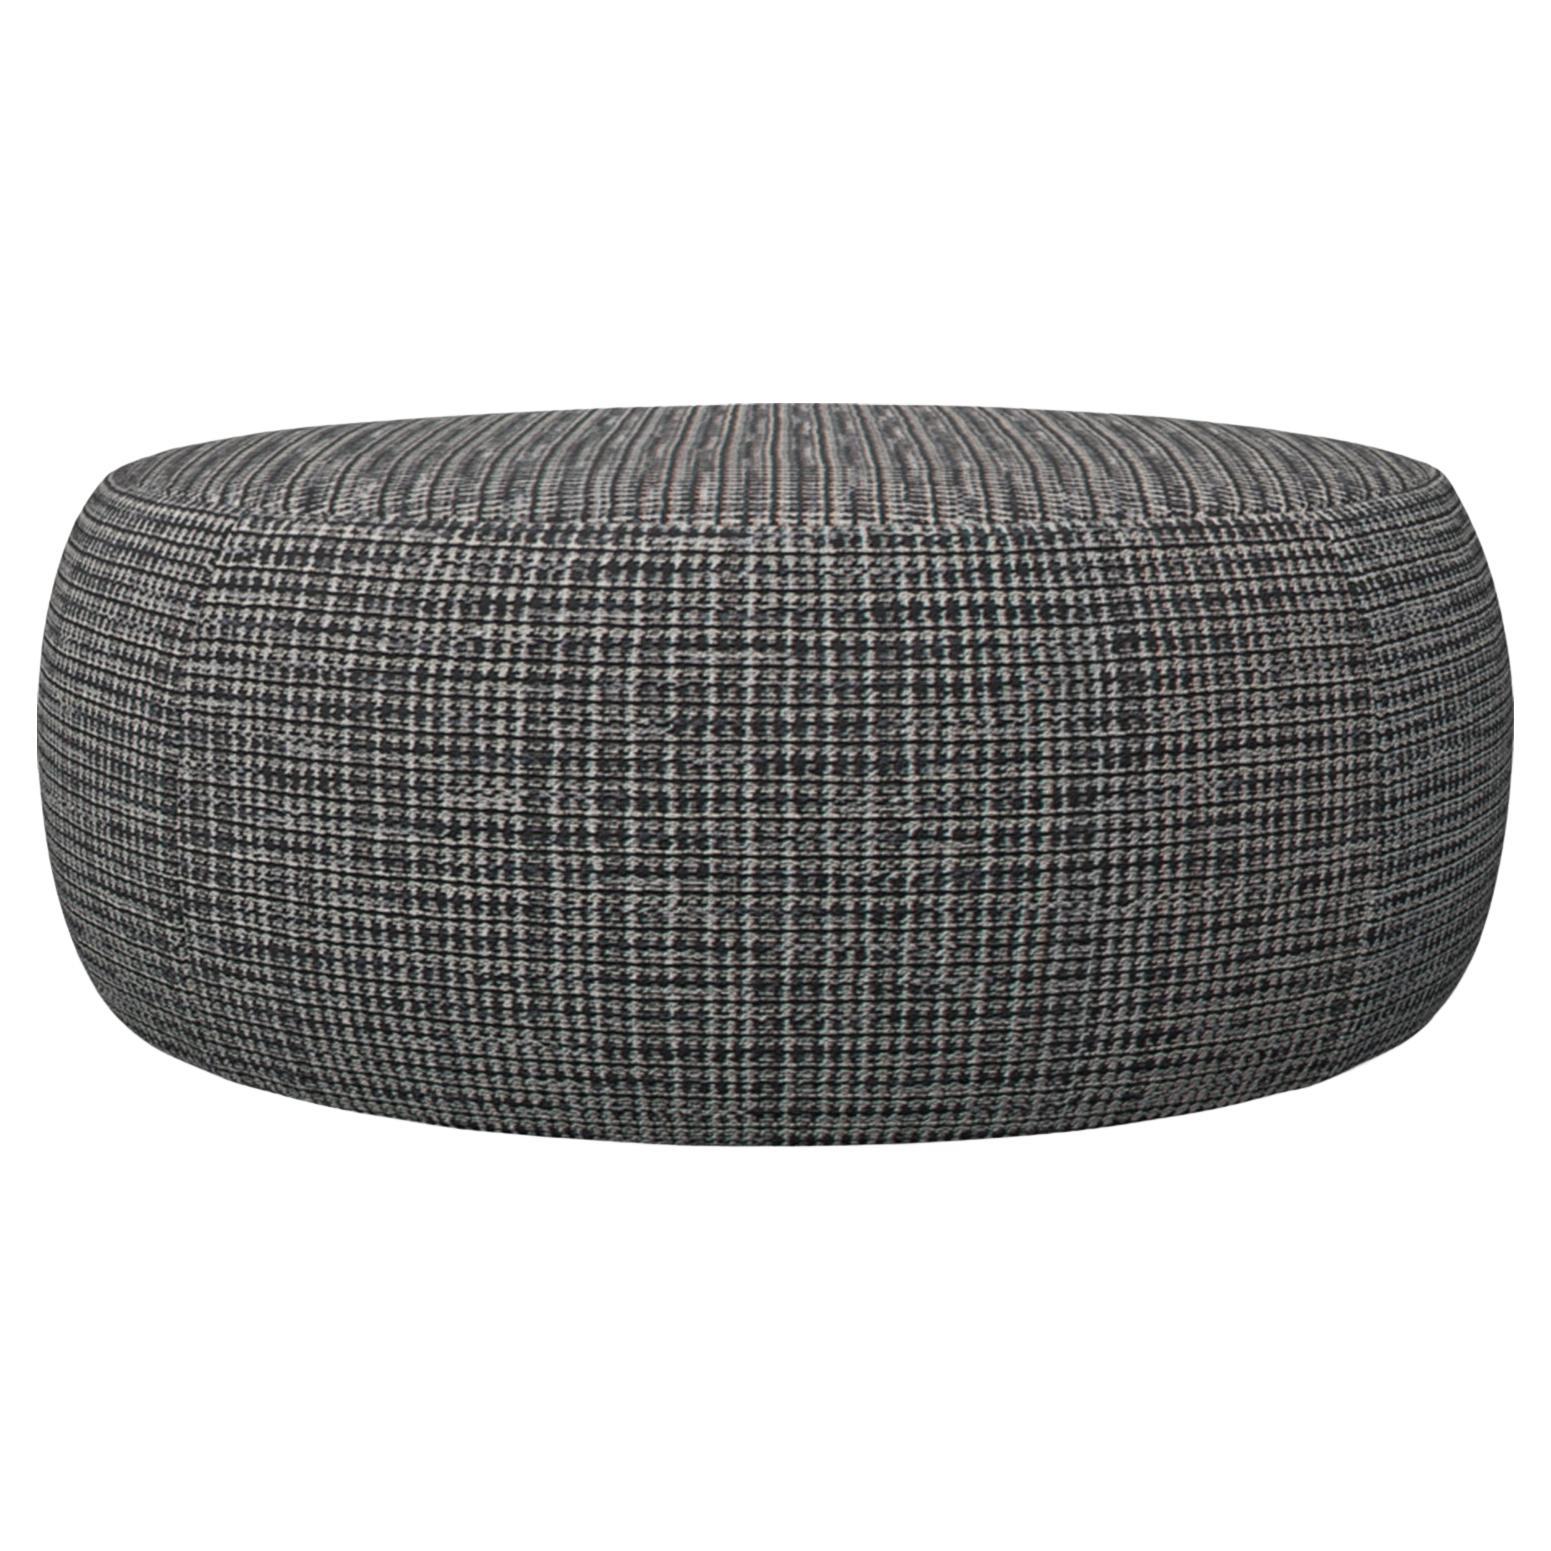 Moooi Pooof Large Pouf in Boucle, Black and White Upholstery For Sale